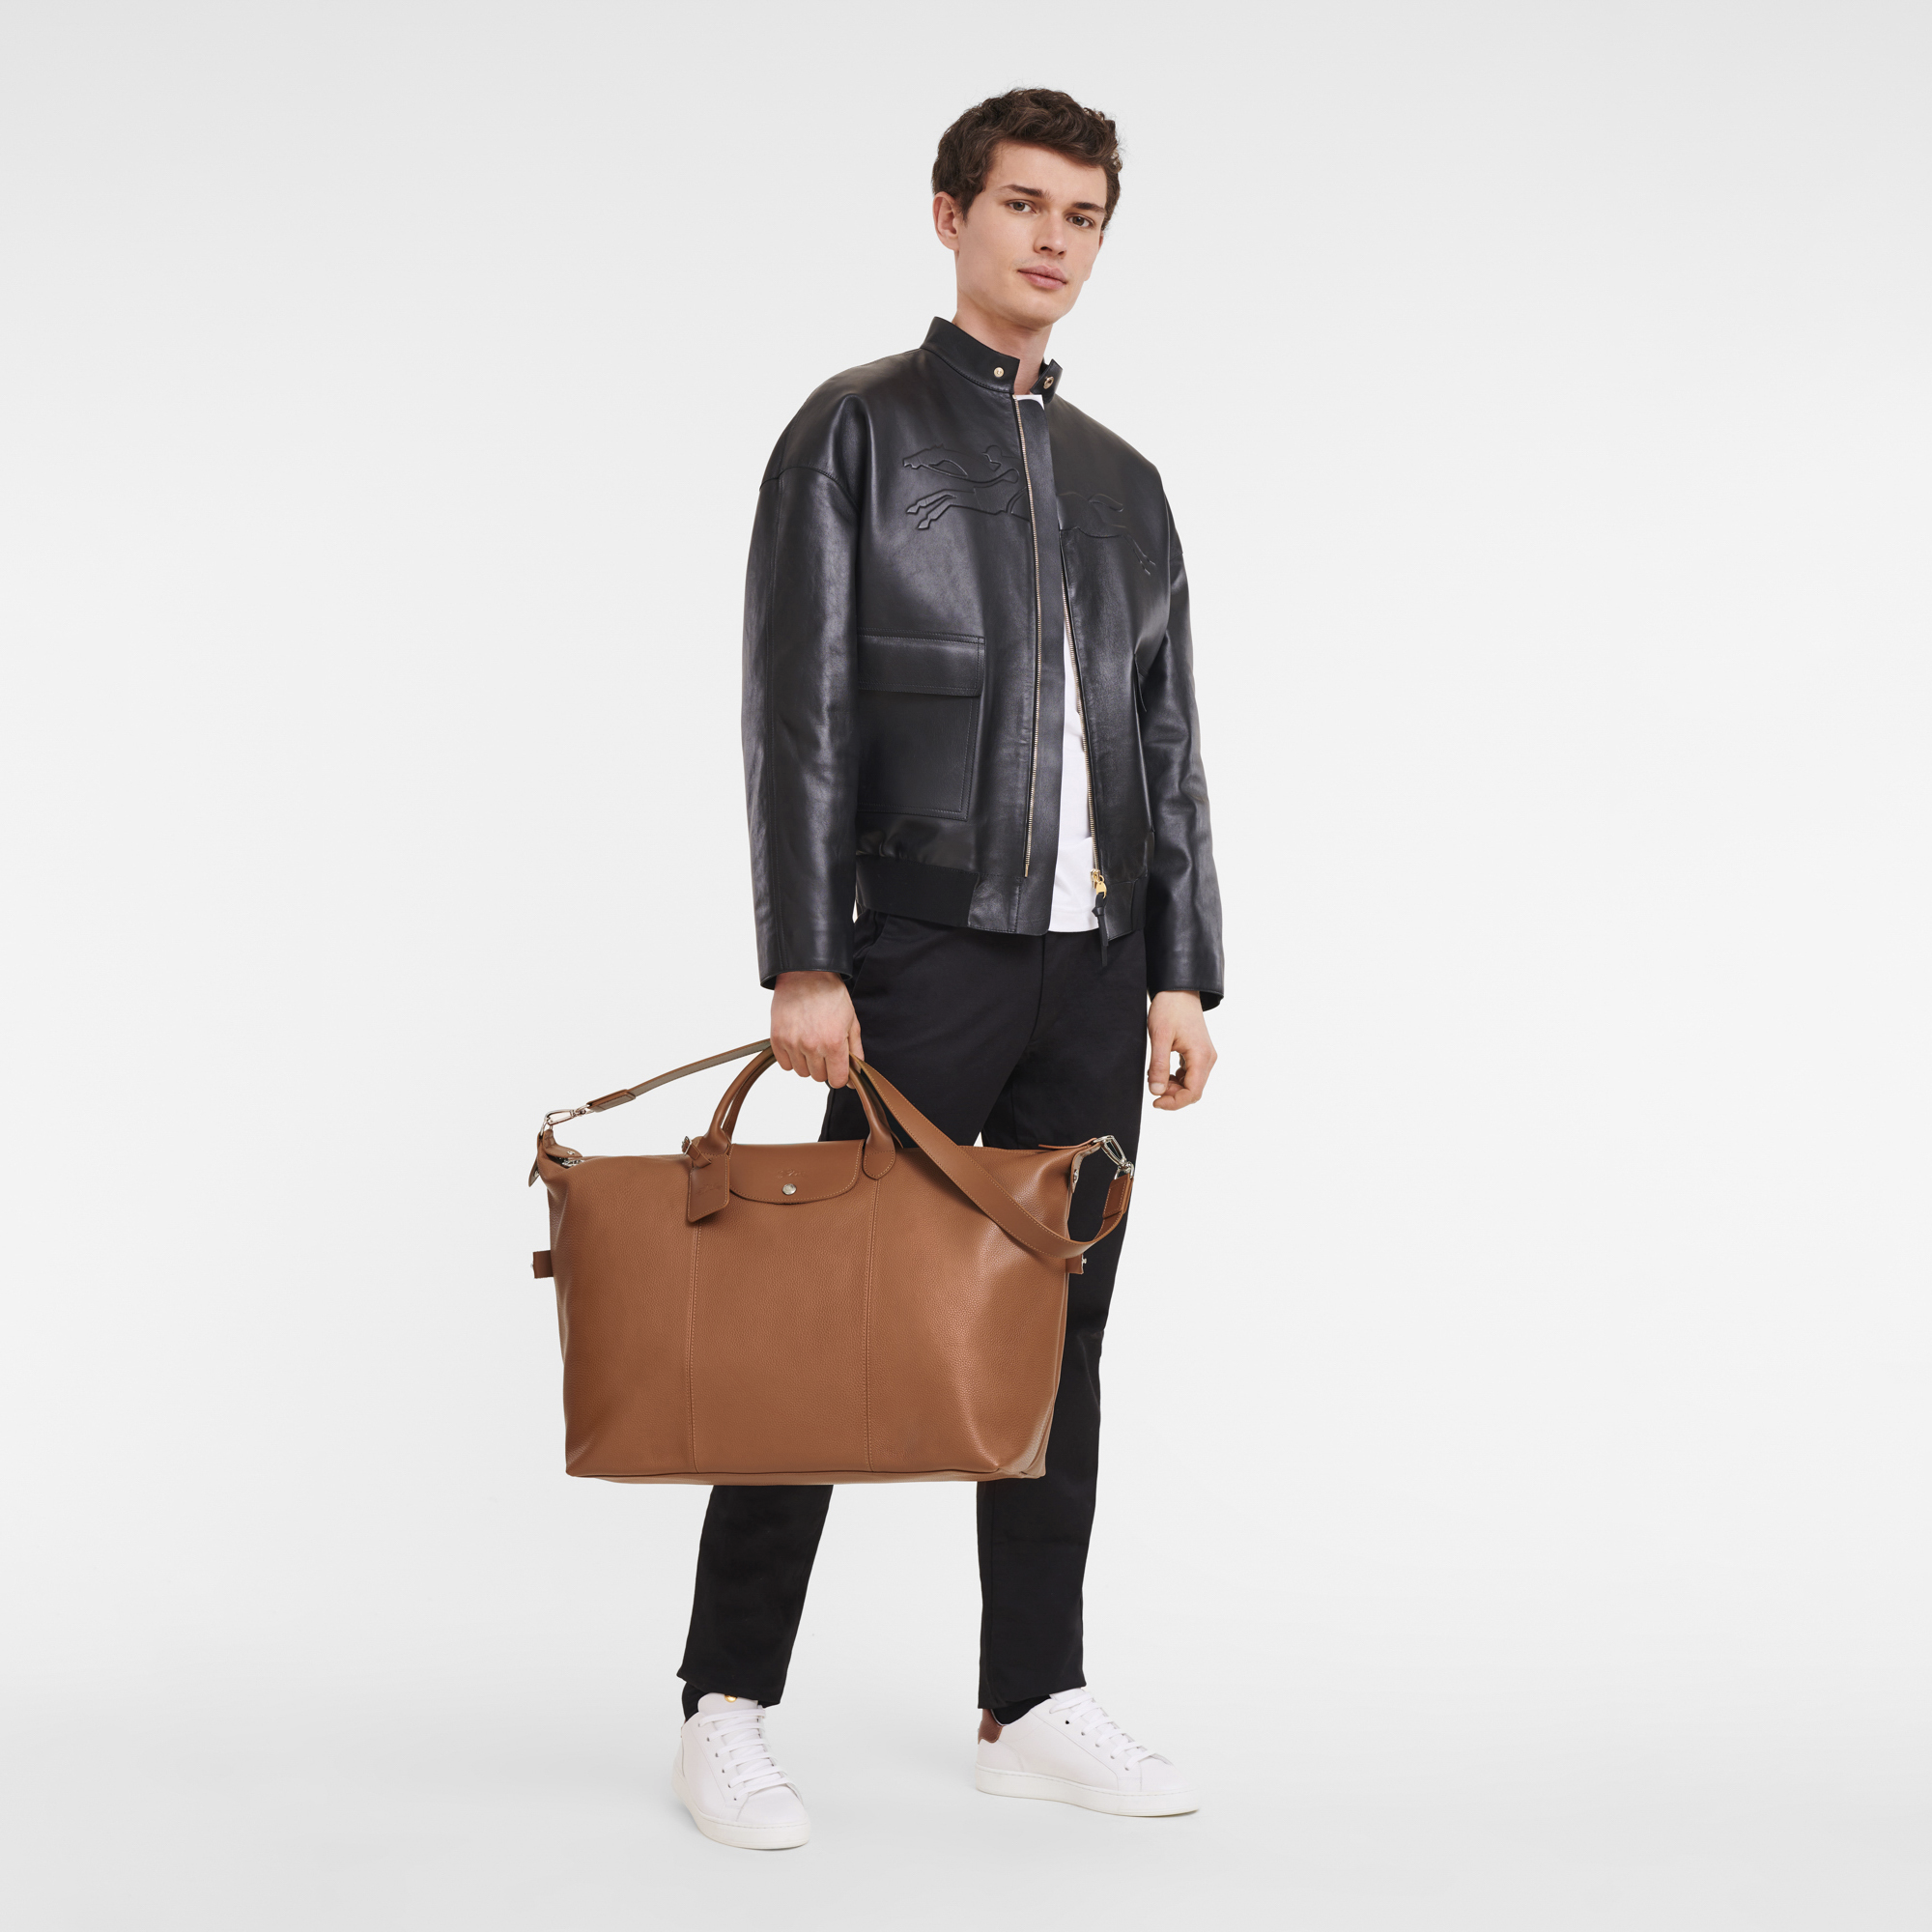 on A Voyage Leather Tote Bag | Pampora Leather